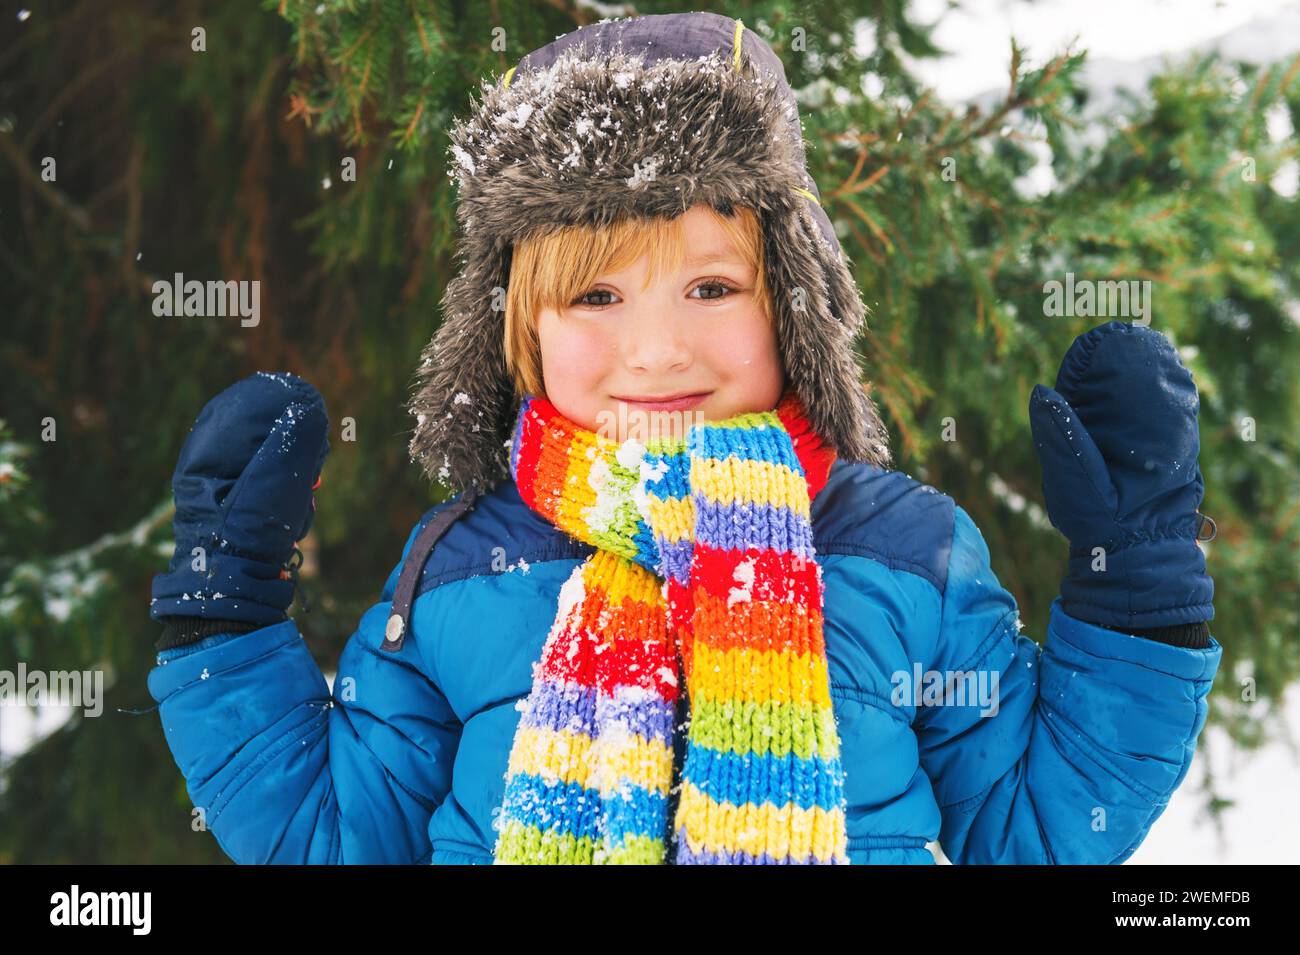 Cute little boy playing in winter park. Kid having fun outdoors, running on snow, wearing warm blue jacket, hat and scarf Stock Photo